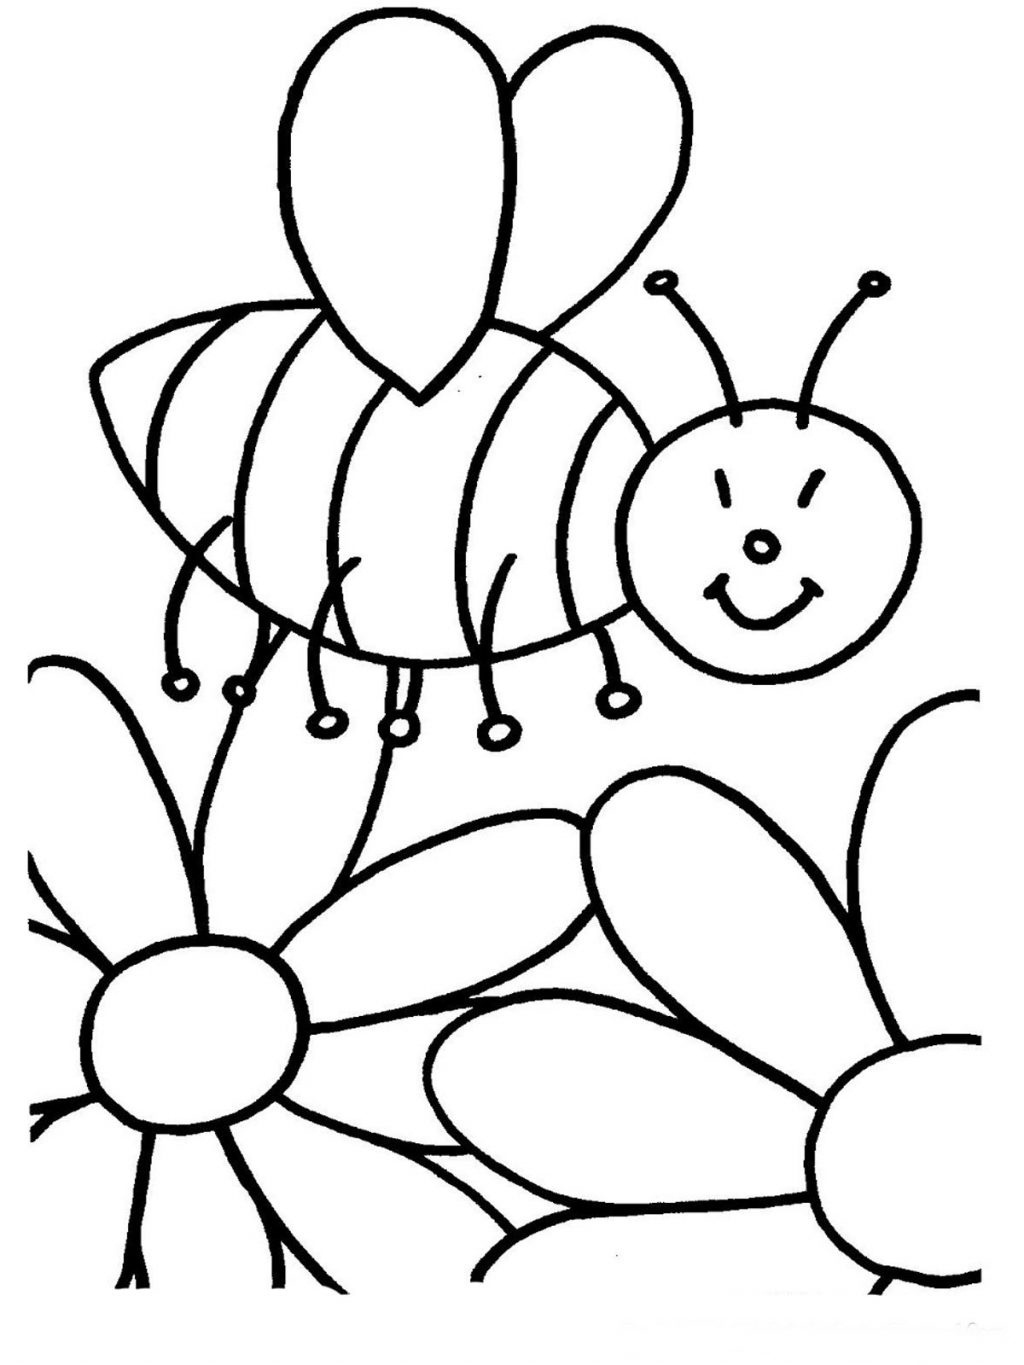 Free Printable Coloring Pages For Toddlers - Free Printable